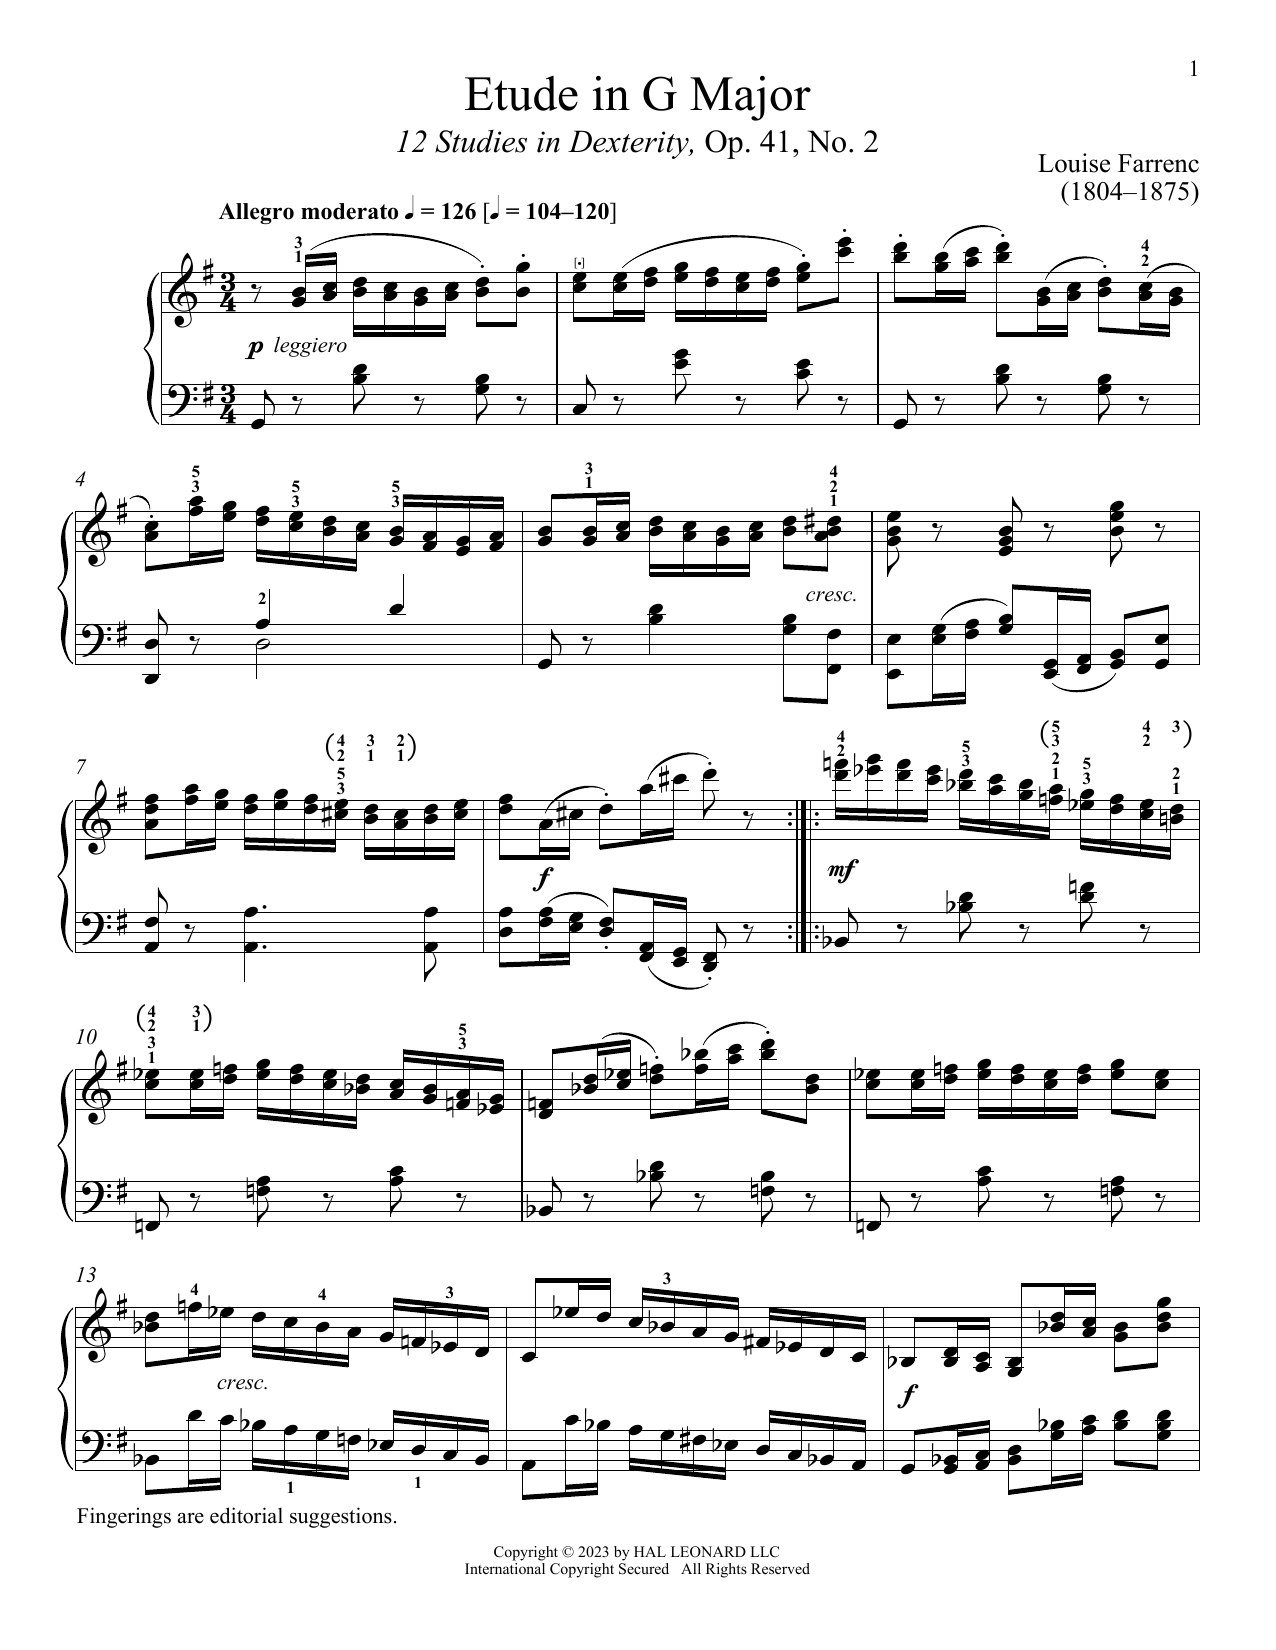 Download Louise Dumont Farrenc Etude in G Major Sheet Music